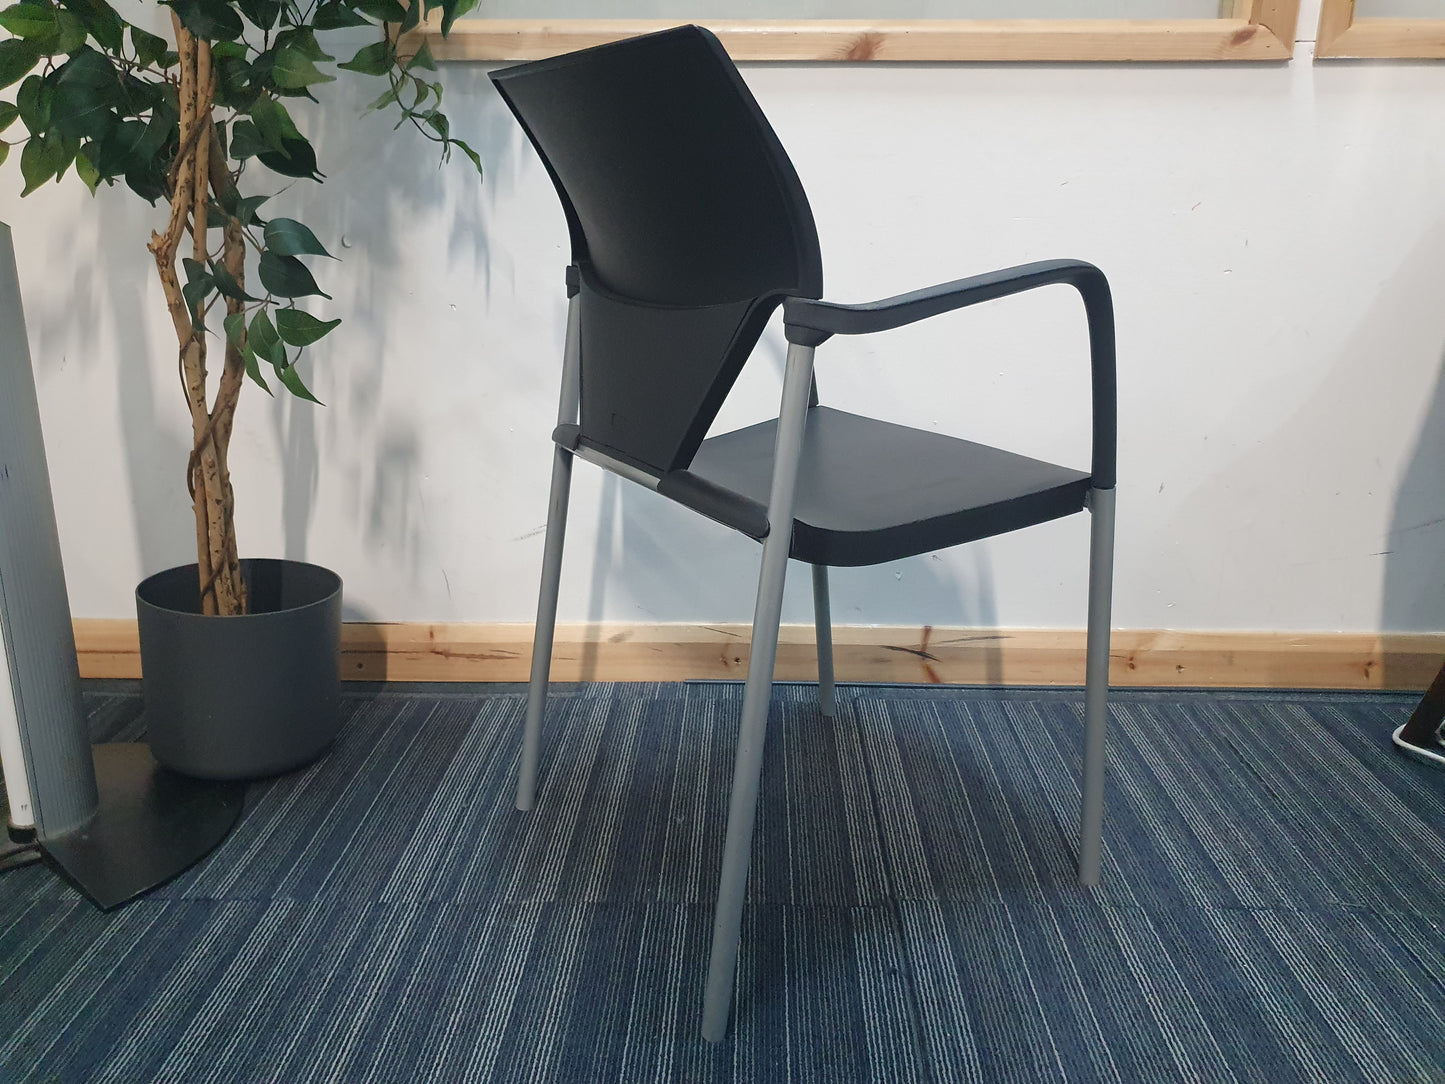 office meeting stick chair in black with armrests with plant on side